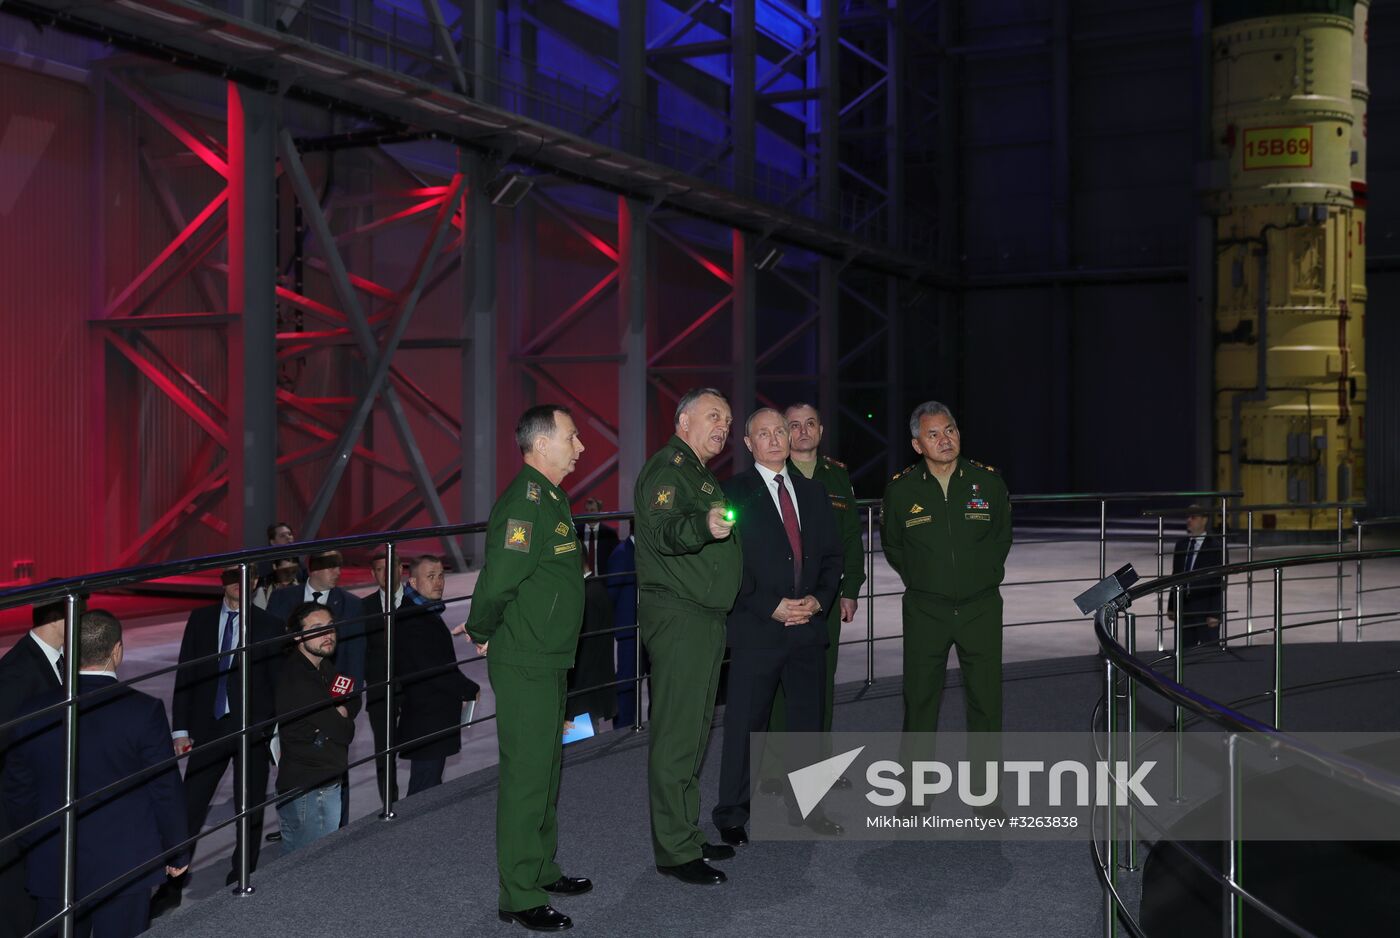 President Putin visits Peter the Great Strategic Missile Force Academy